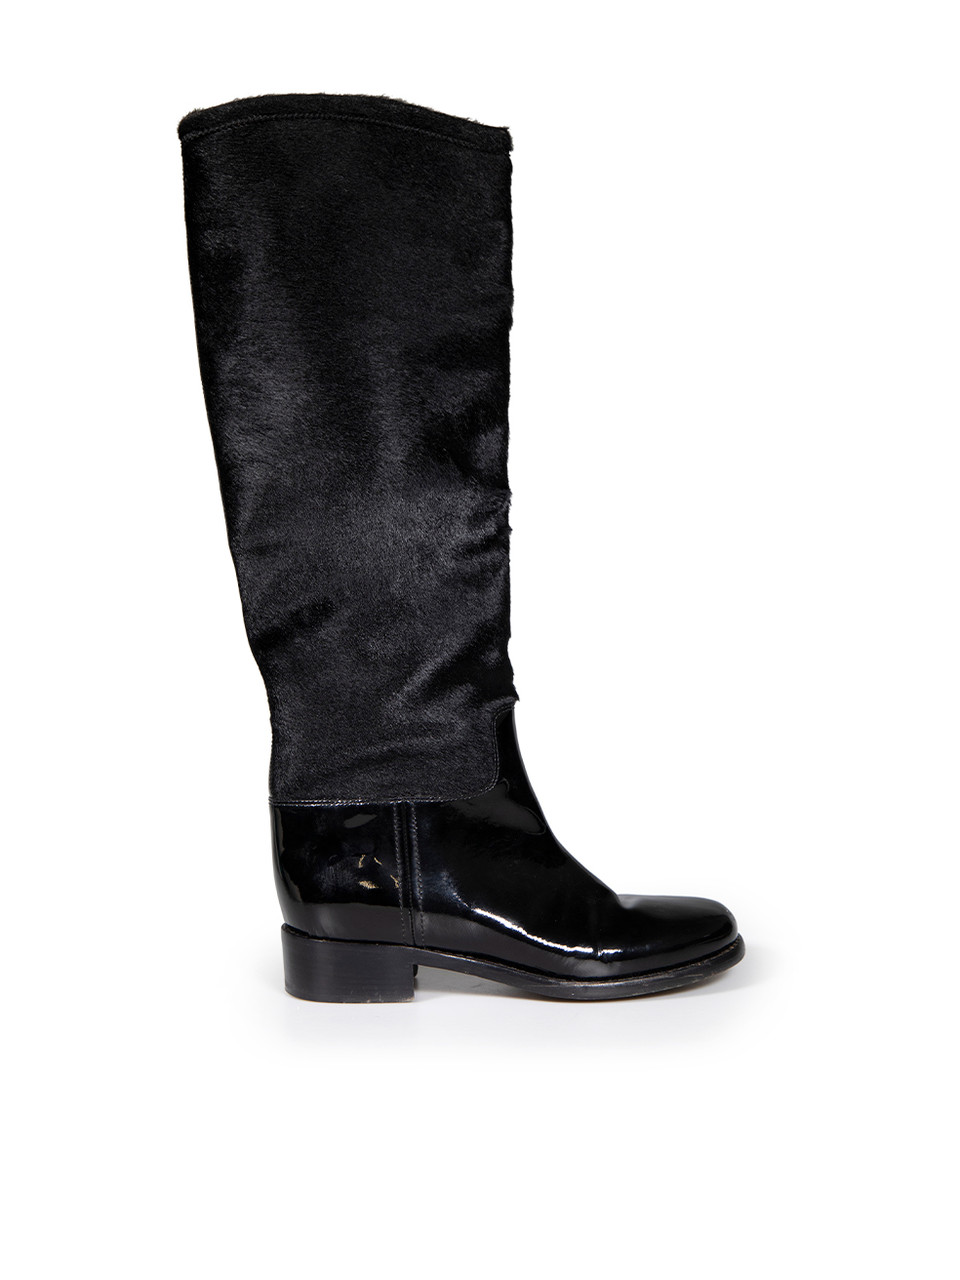 Chanel Black Patent Pony Hair CC Knee High Boots